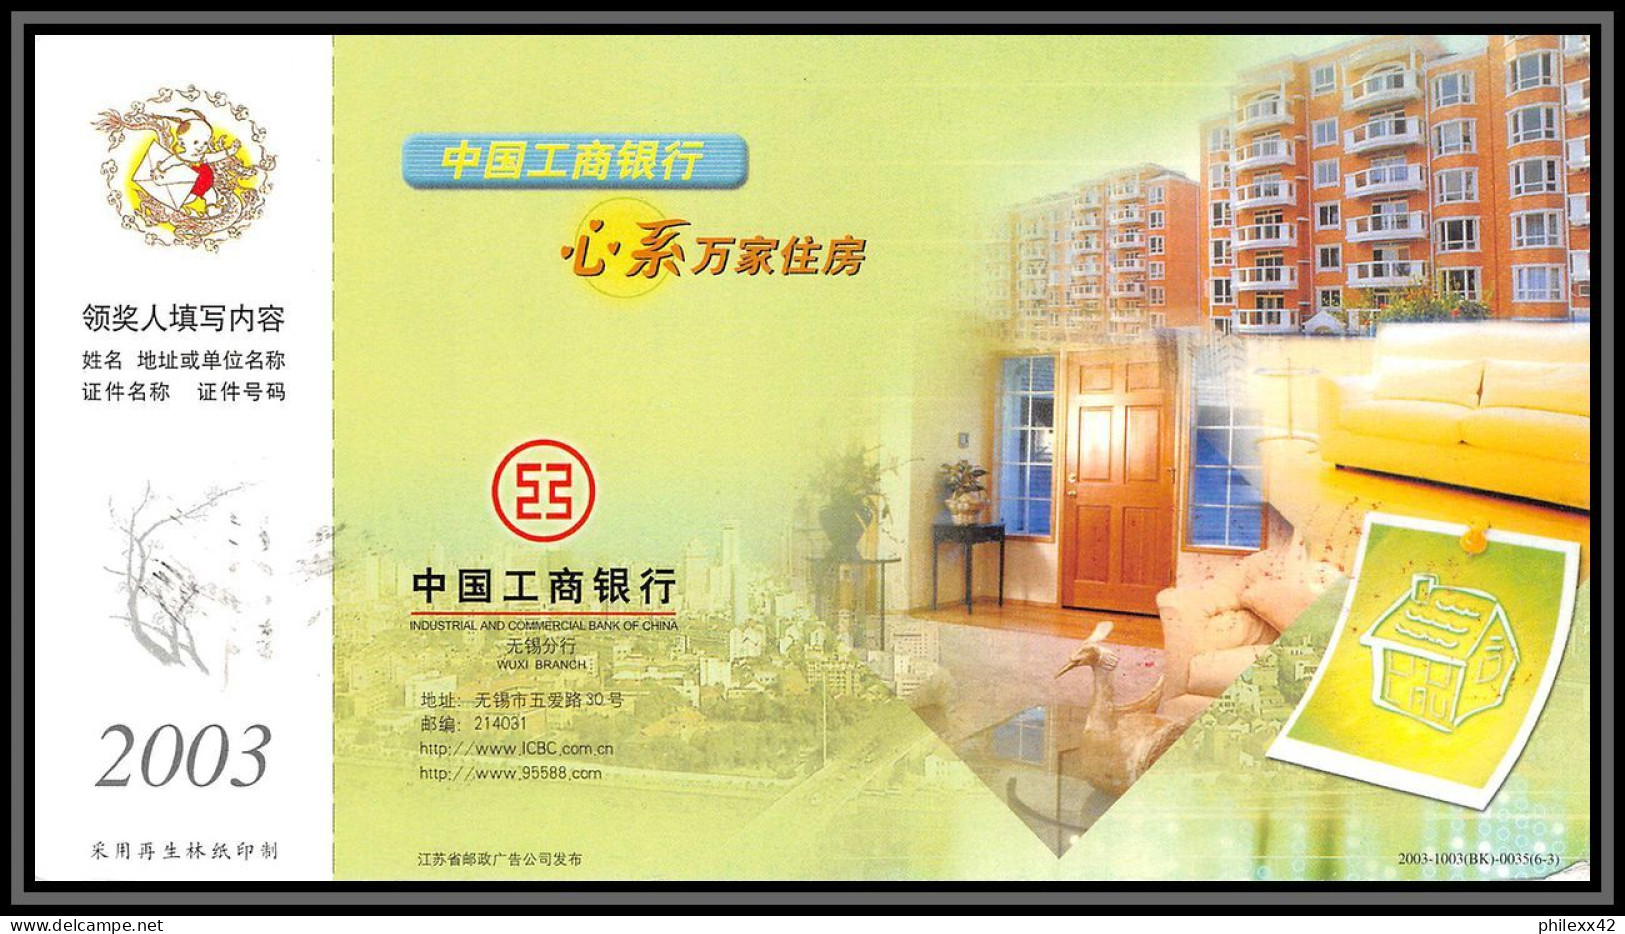 2442 Espace (space Raumfahrt) Entier Postal (Stamped Stationery) Chine (china) 20/5/2015 - Asie